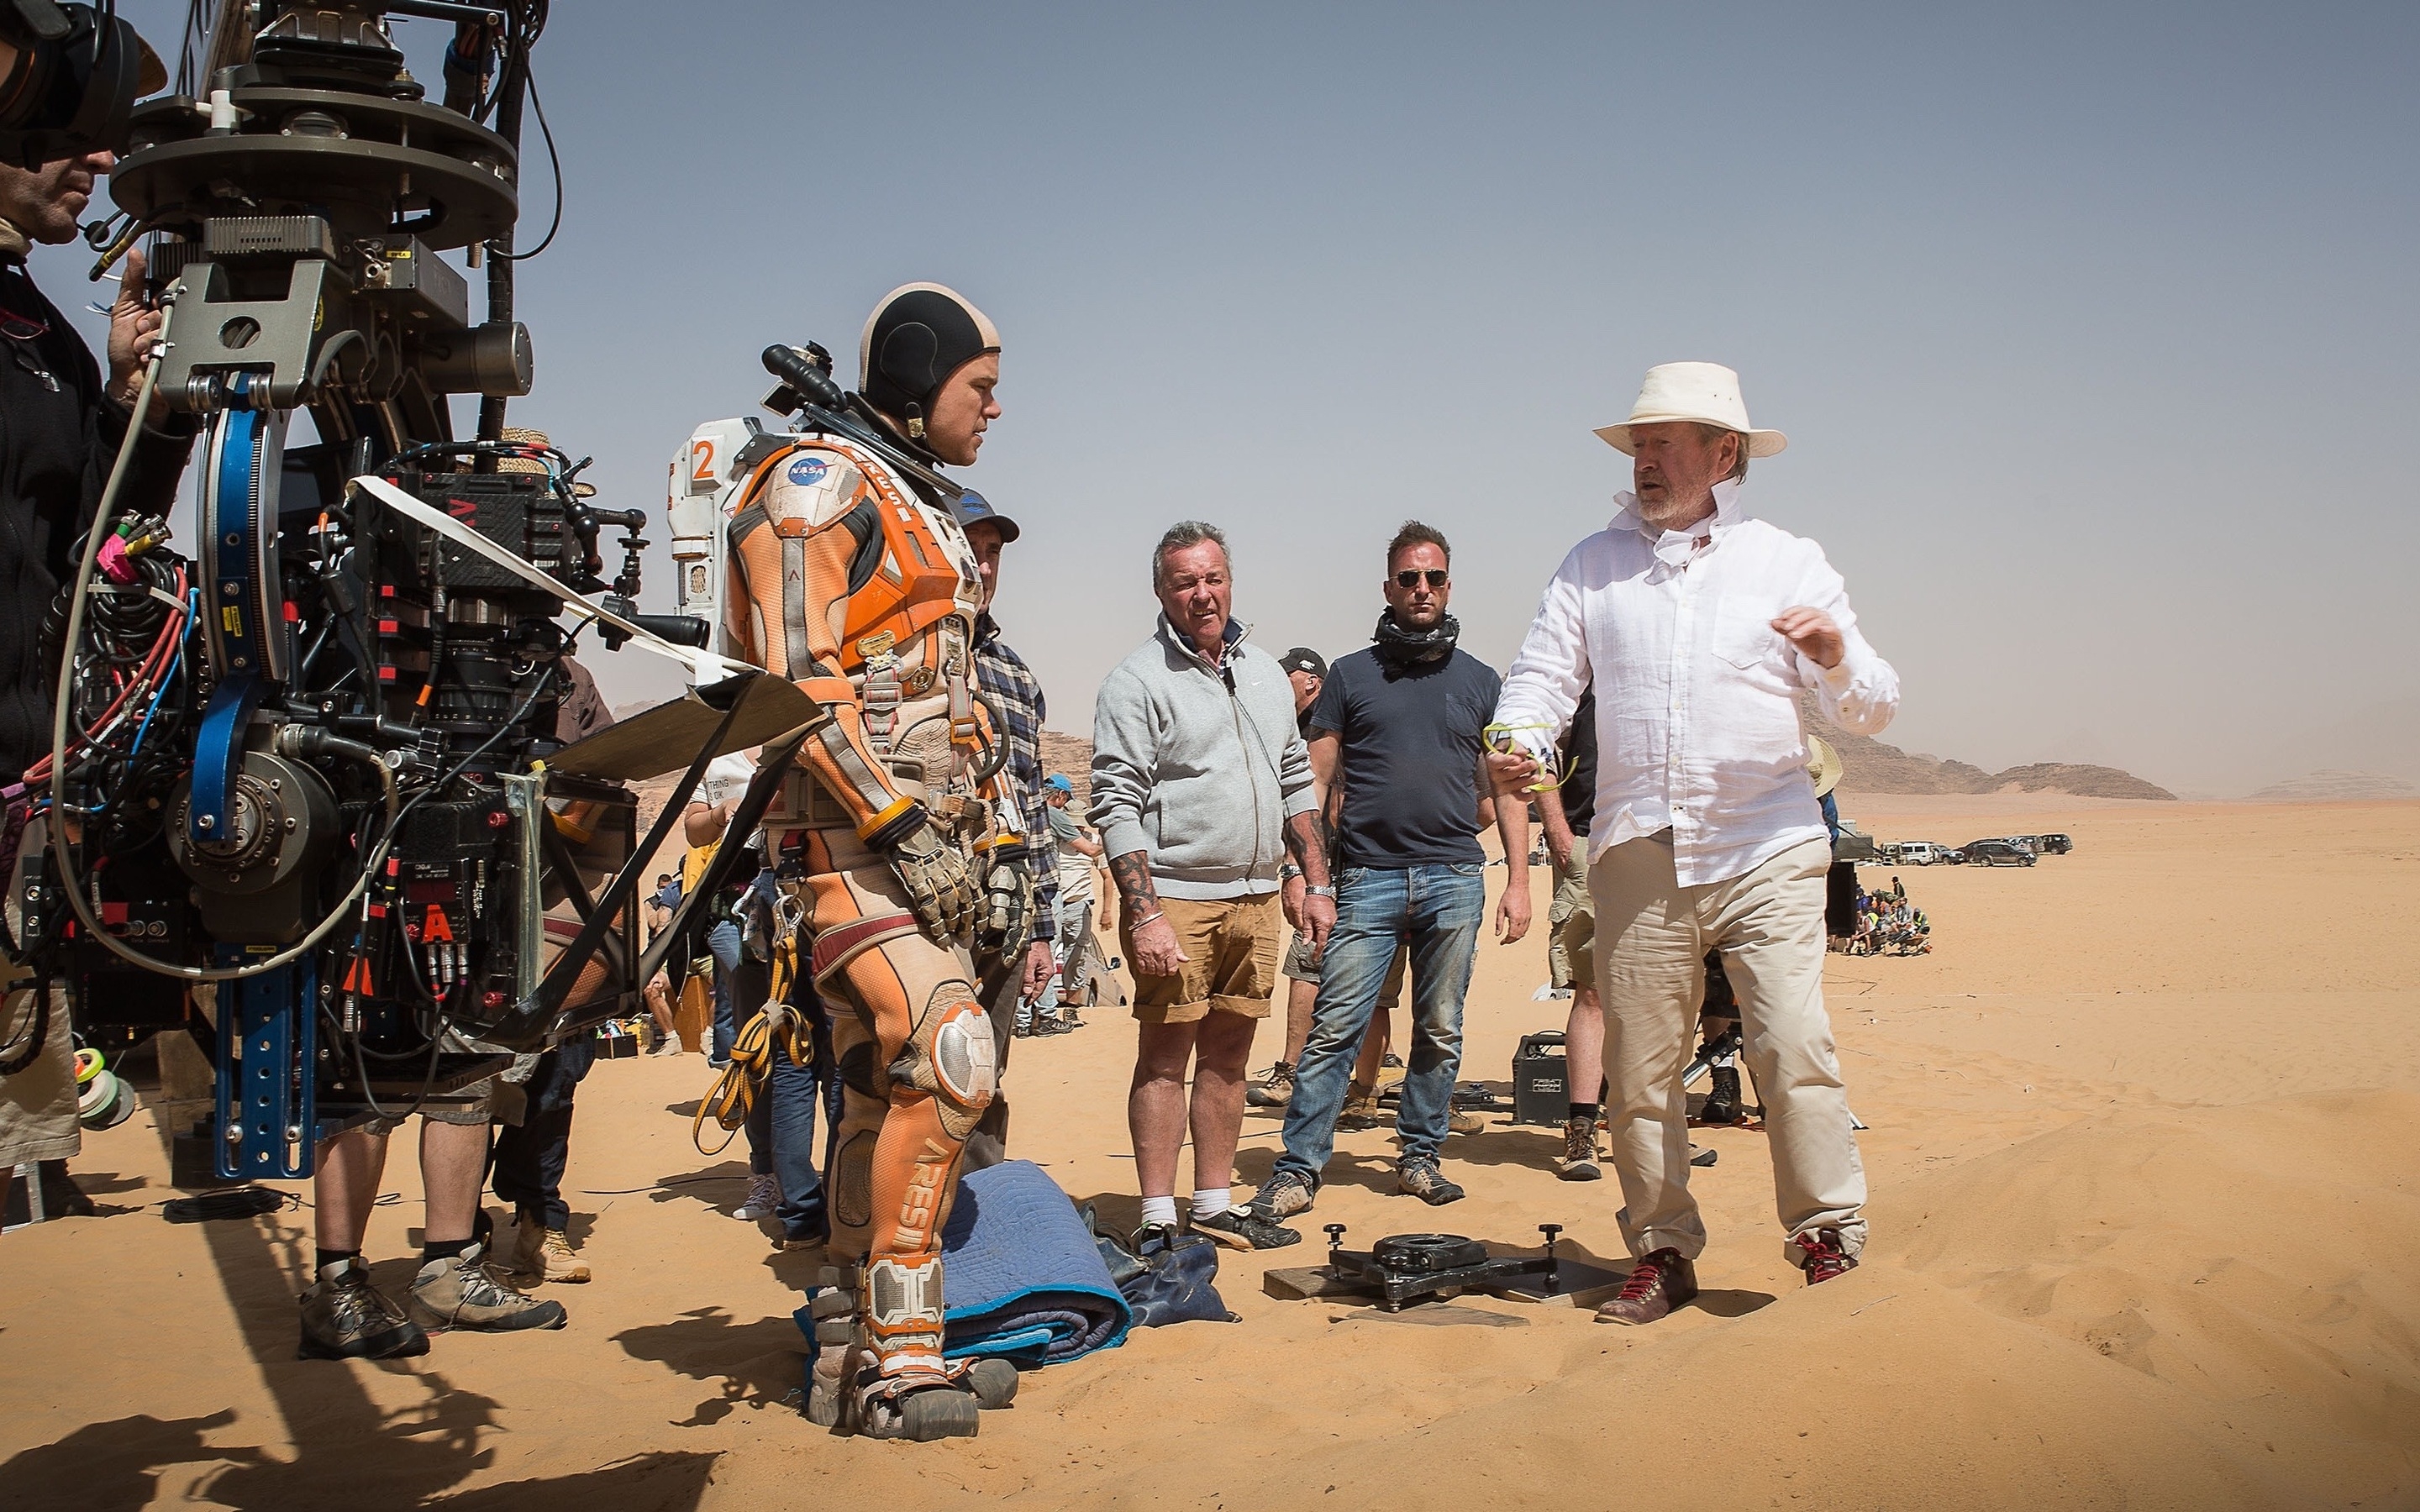 The Martian Directing for 2880 x 1800 Retina Display resolution